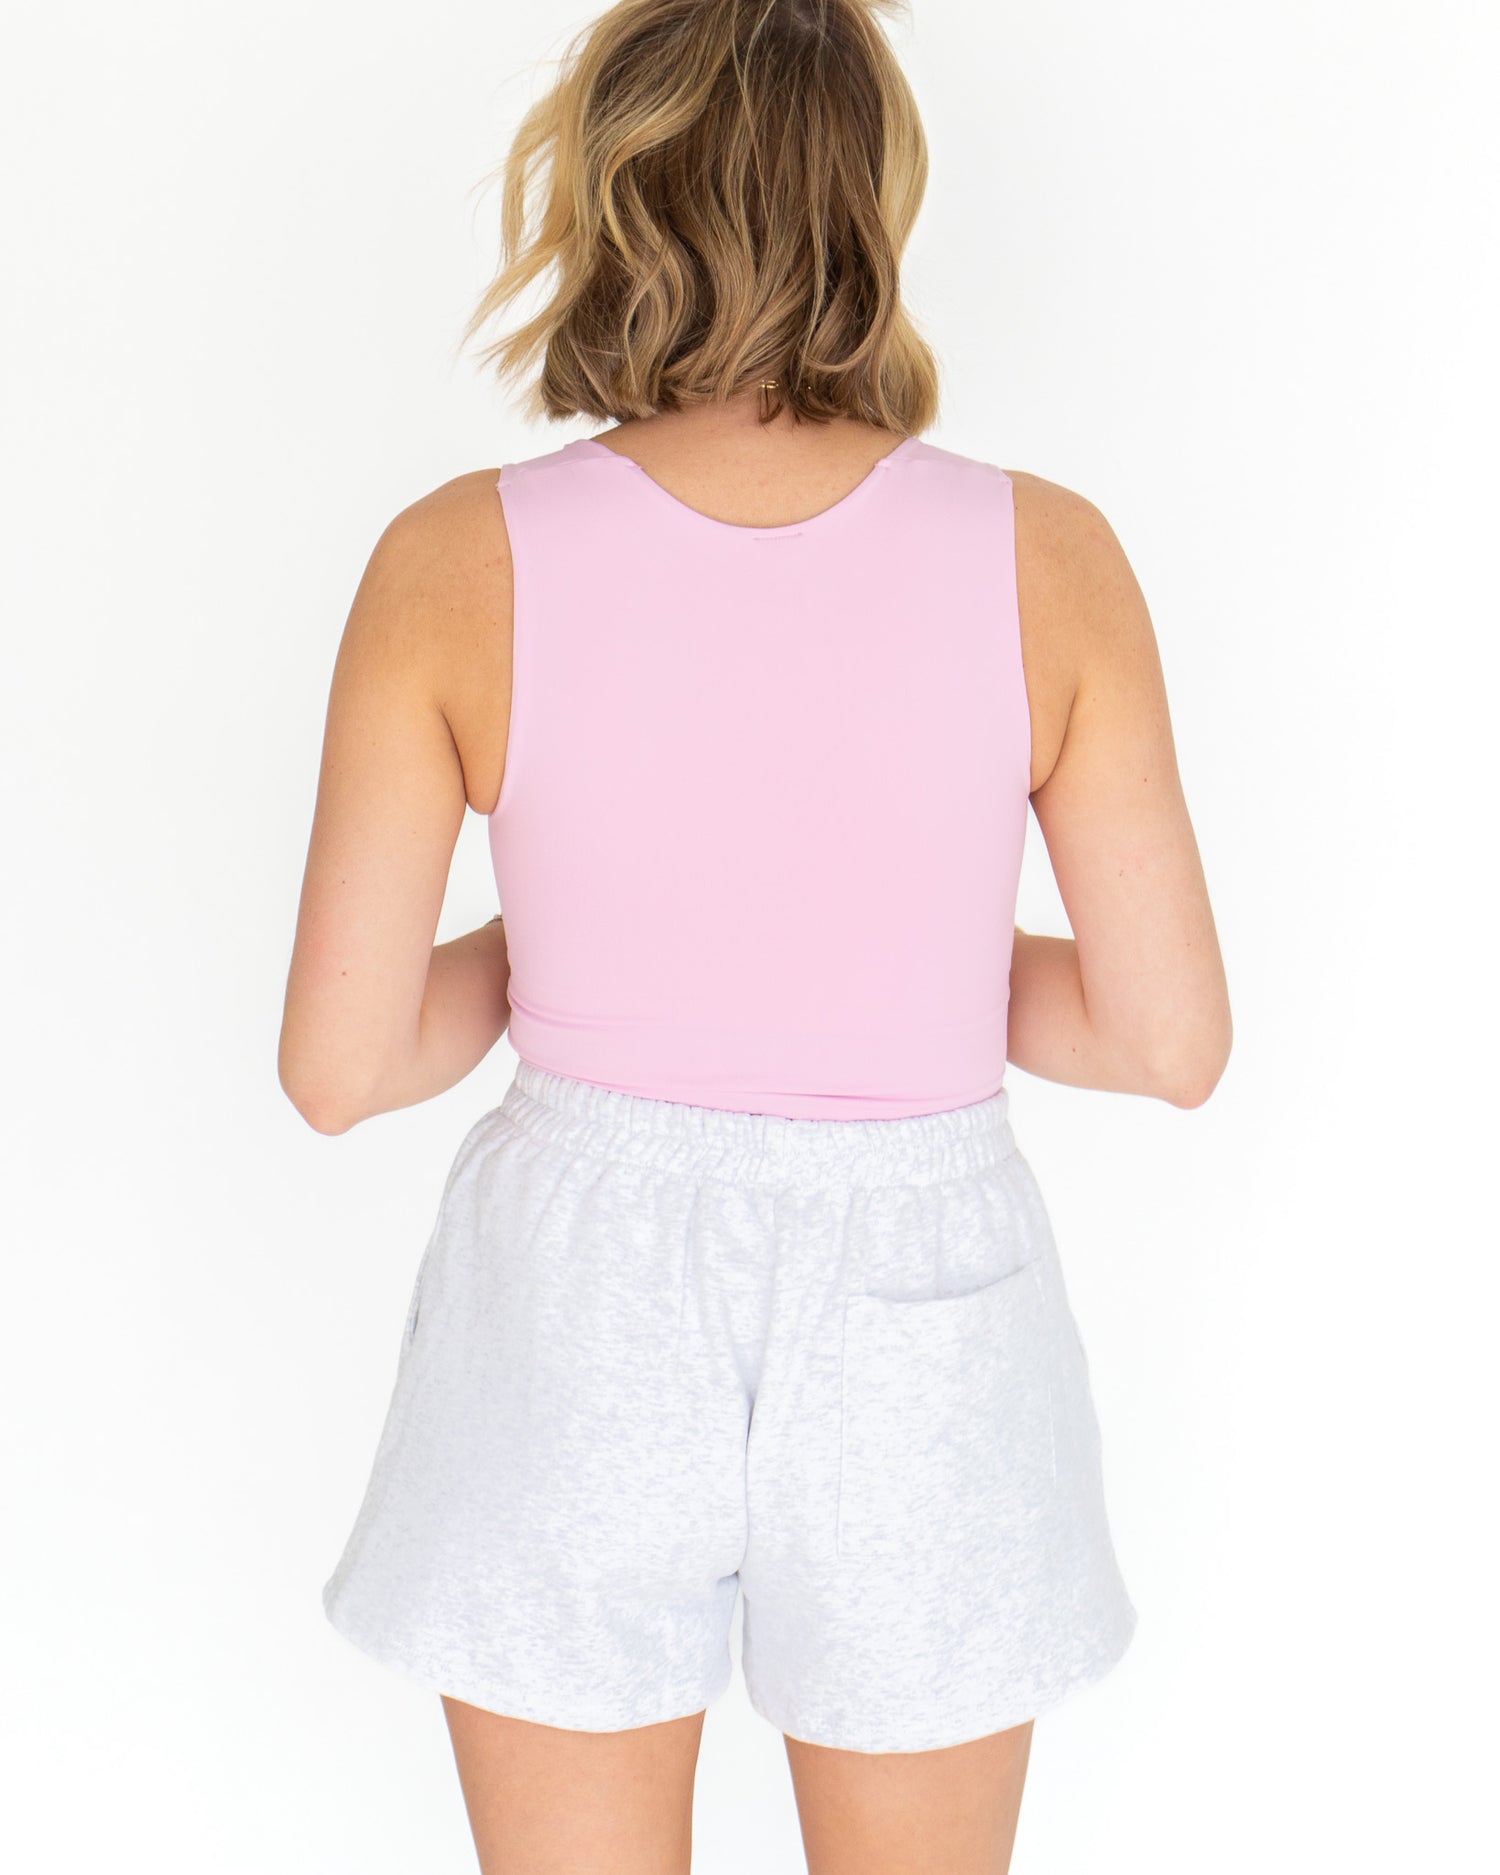 Clean Line Square Neck Top - Peony Pink